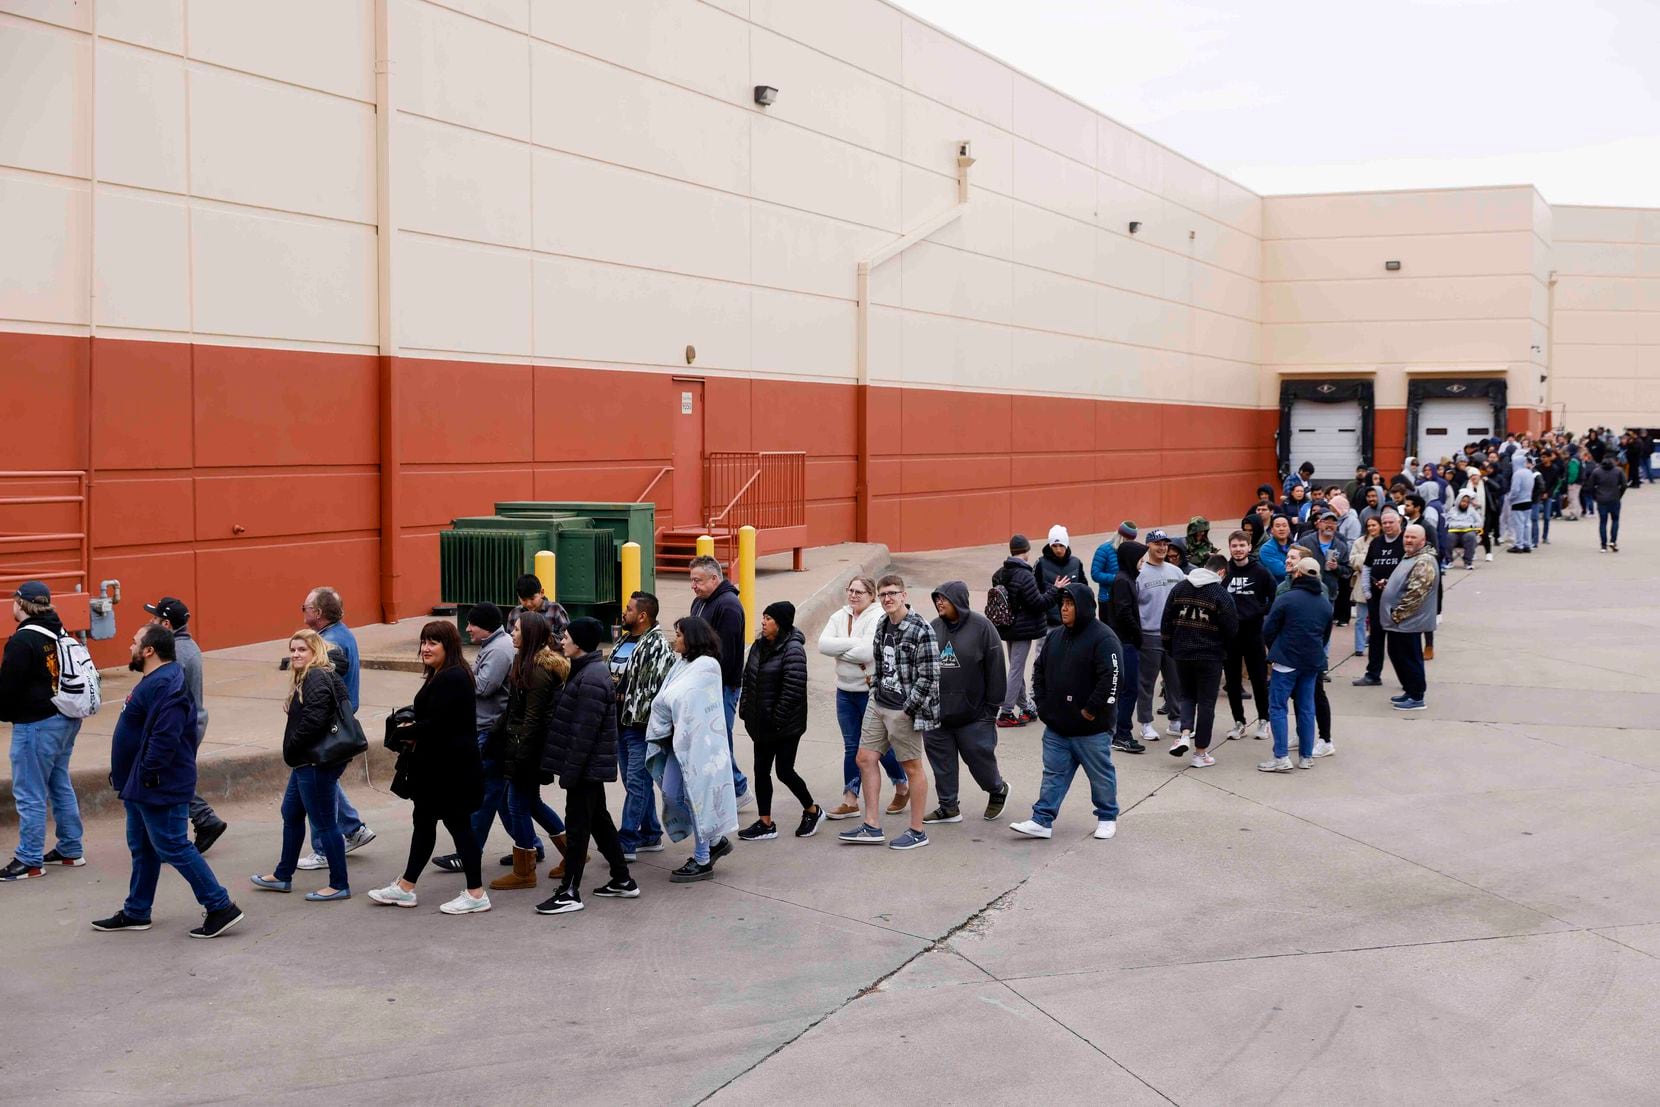 Hundreds of people wait in line to get a glimpse of actors Bryan Cranston and Aaron Paul...